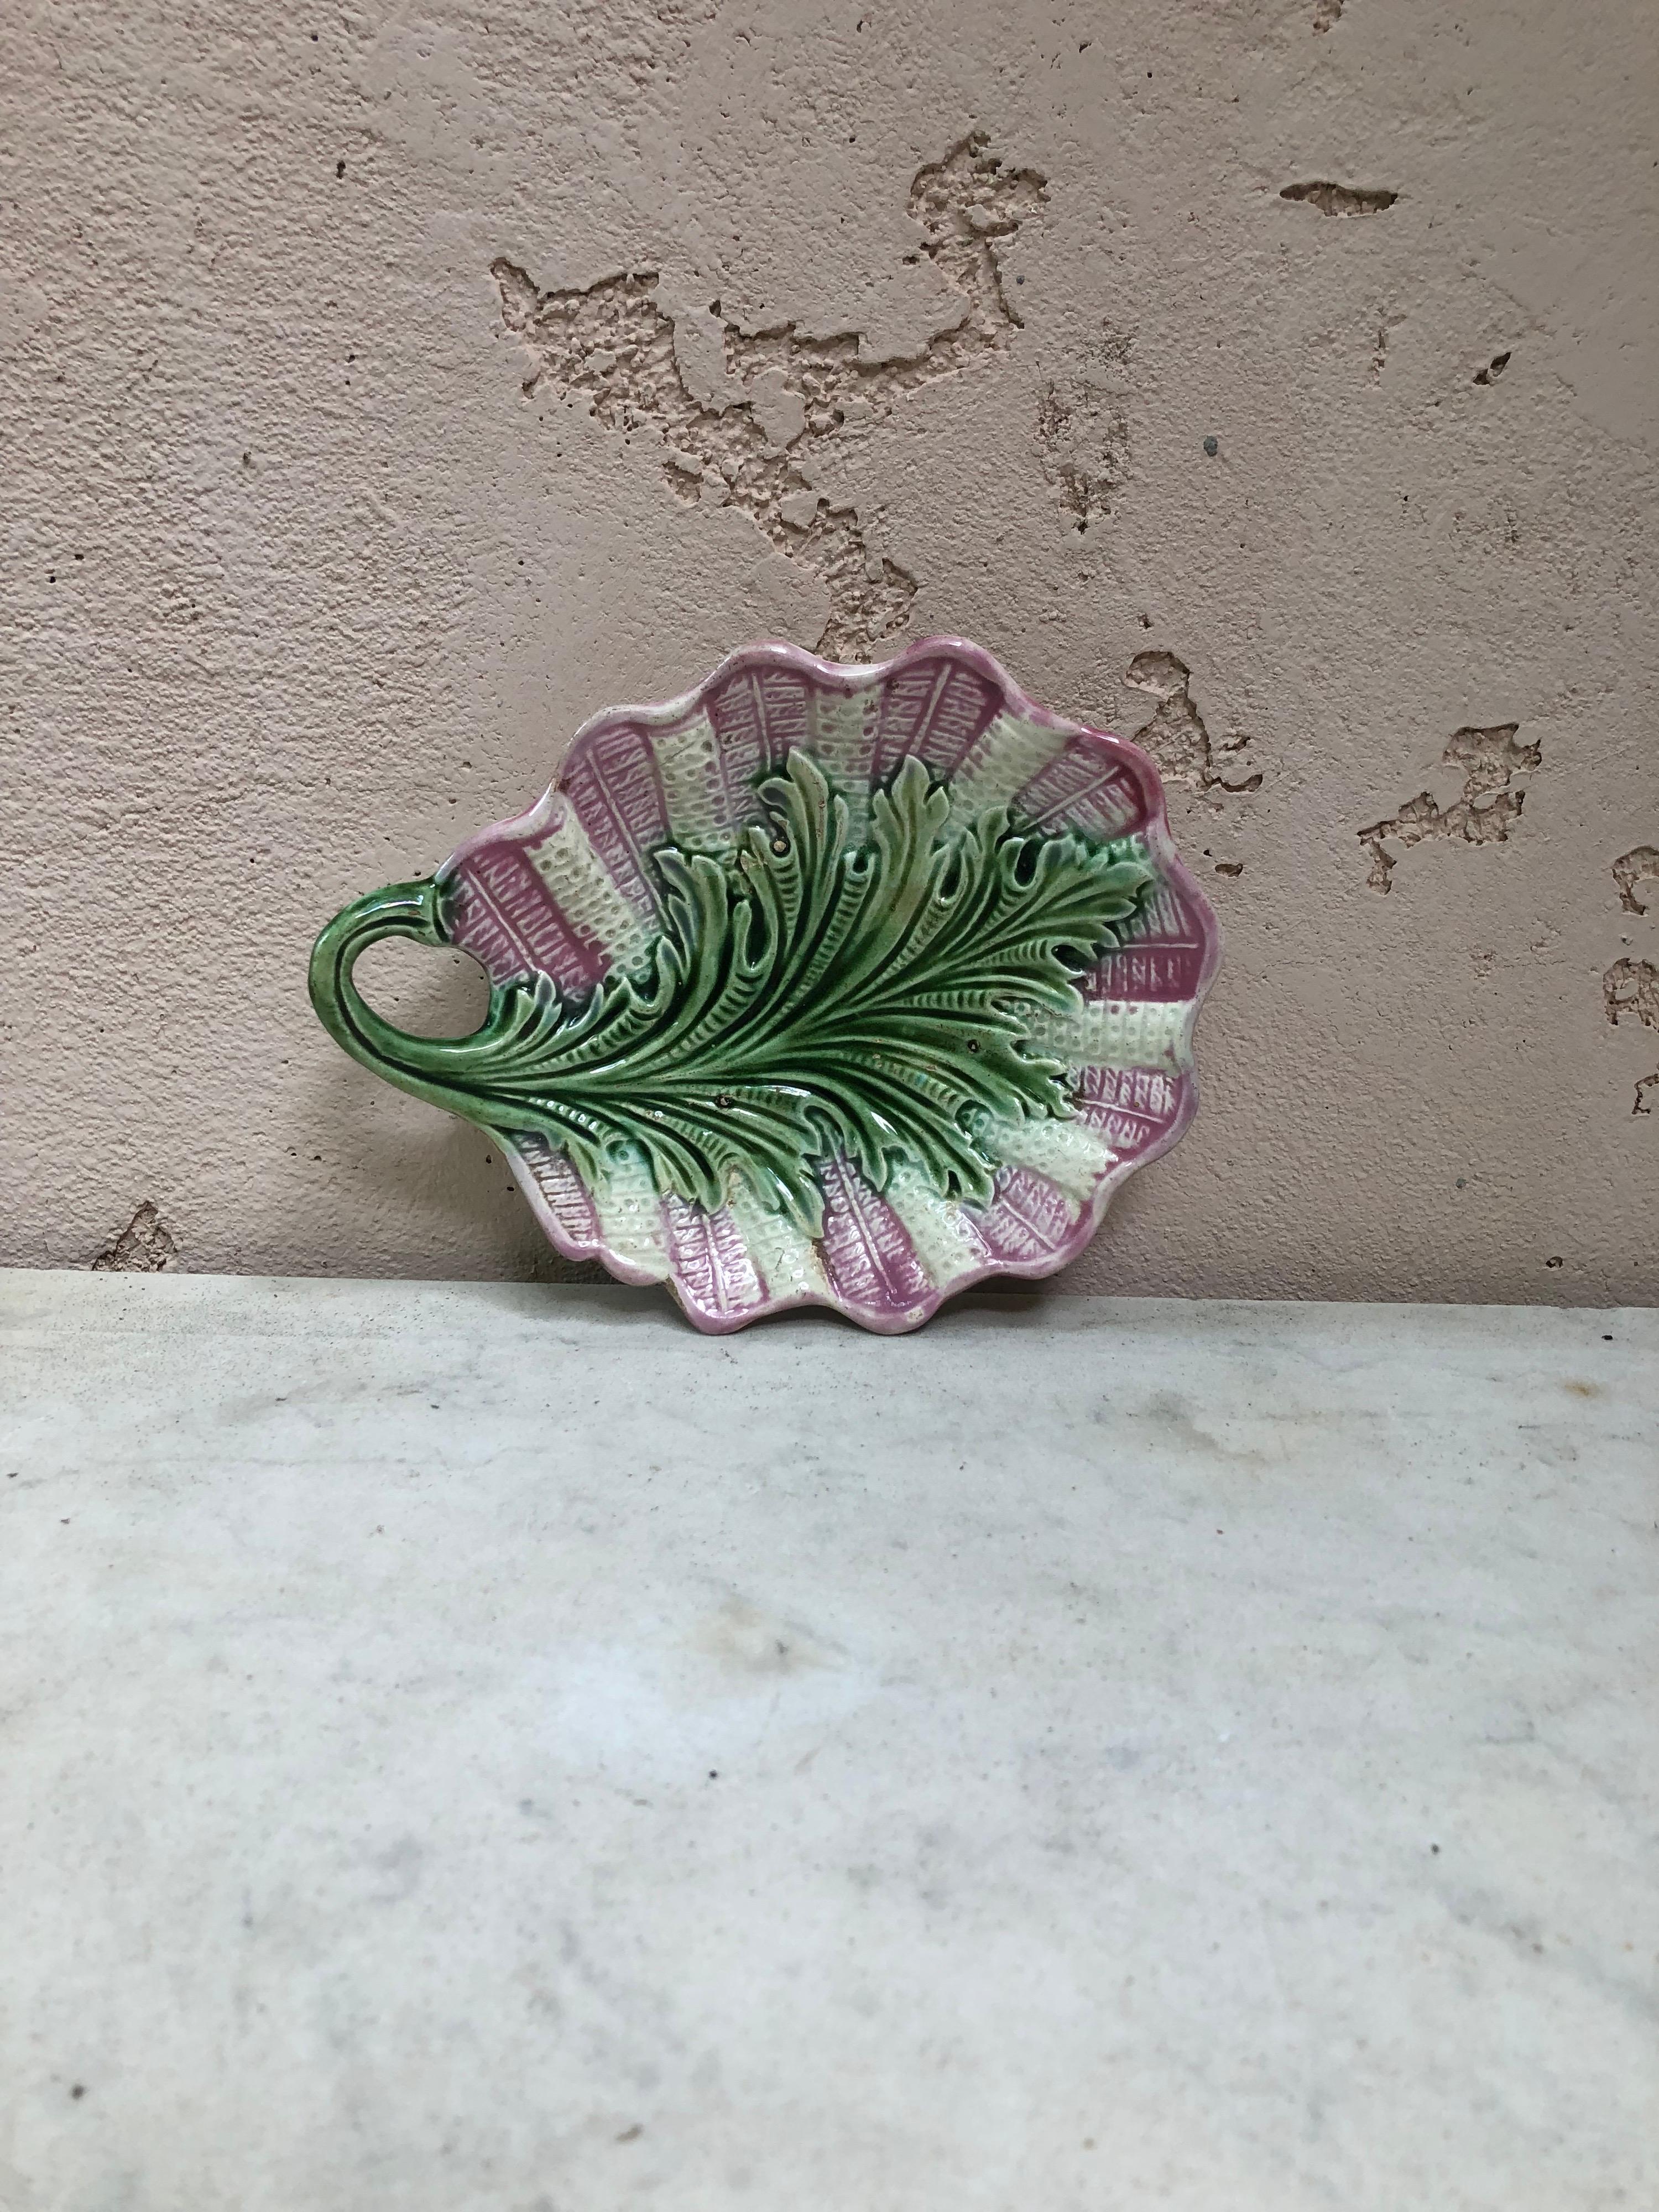 French Majolica dish with a curled leaf-stem handle, circa 1890.